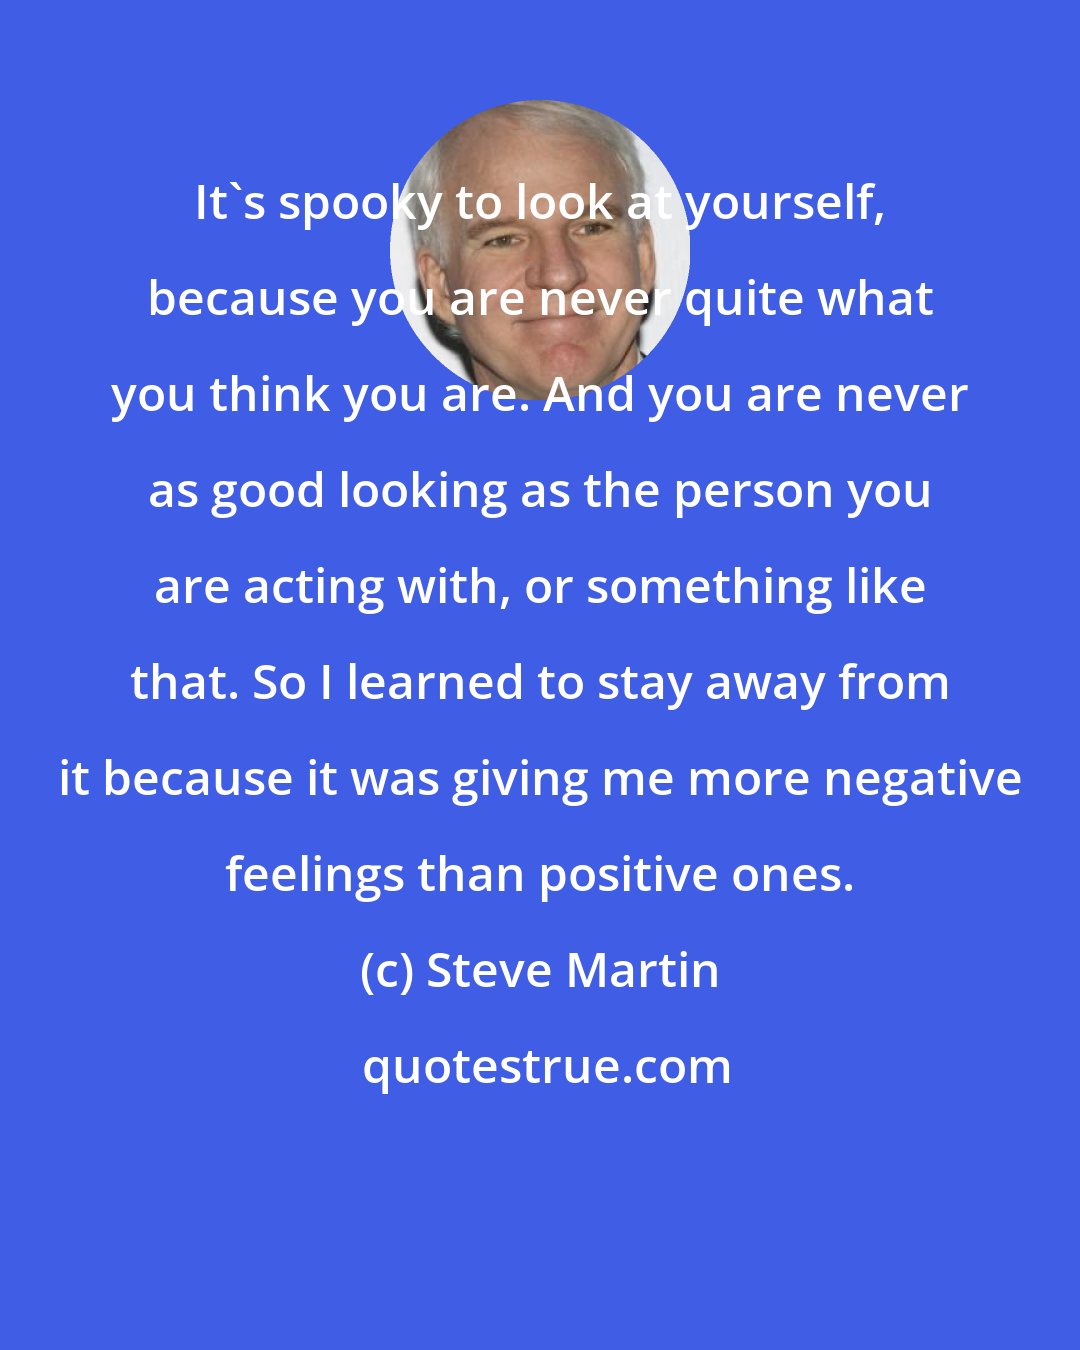 Steve Martin: It's spooky to look at yourself, because you are never quite what you think you are. And you are never as good looking as the person you are acting with, or something like that. So I learned to stay away from it because it was giving me more negative feelings than positive ones.